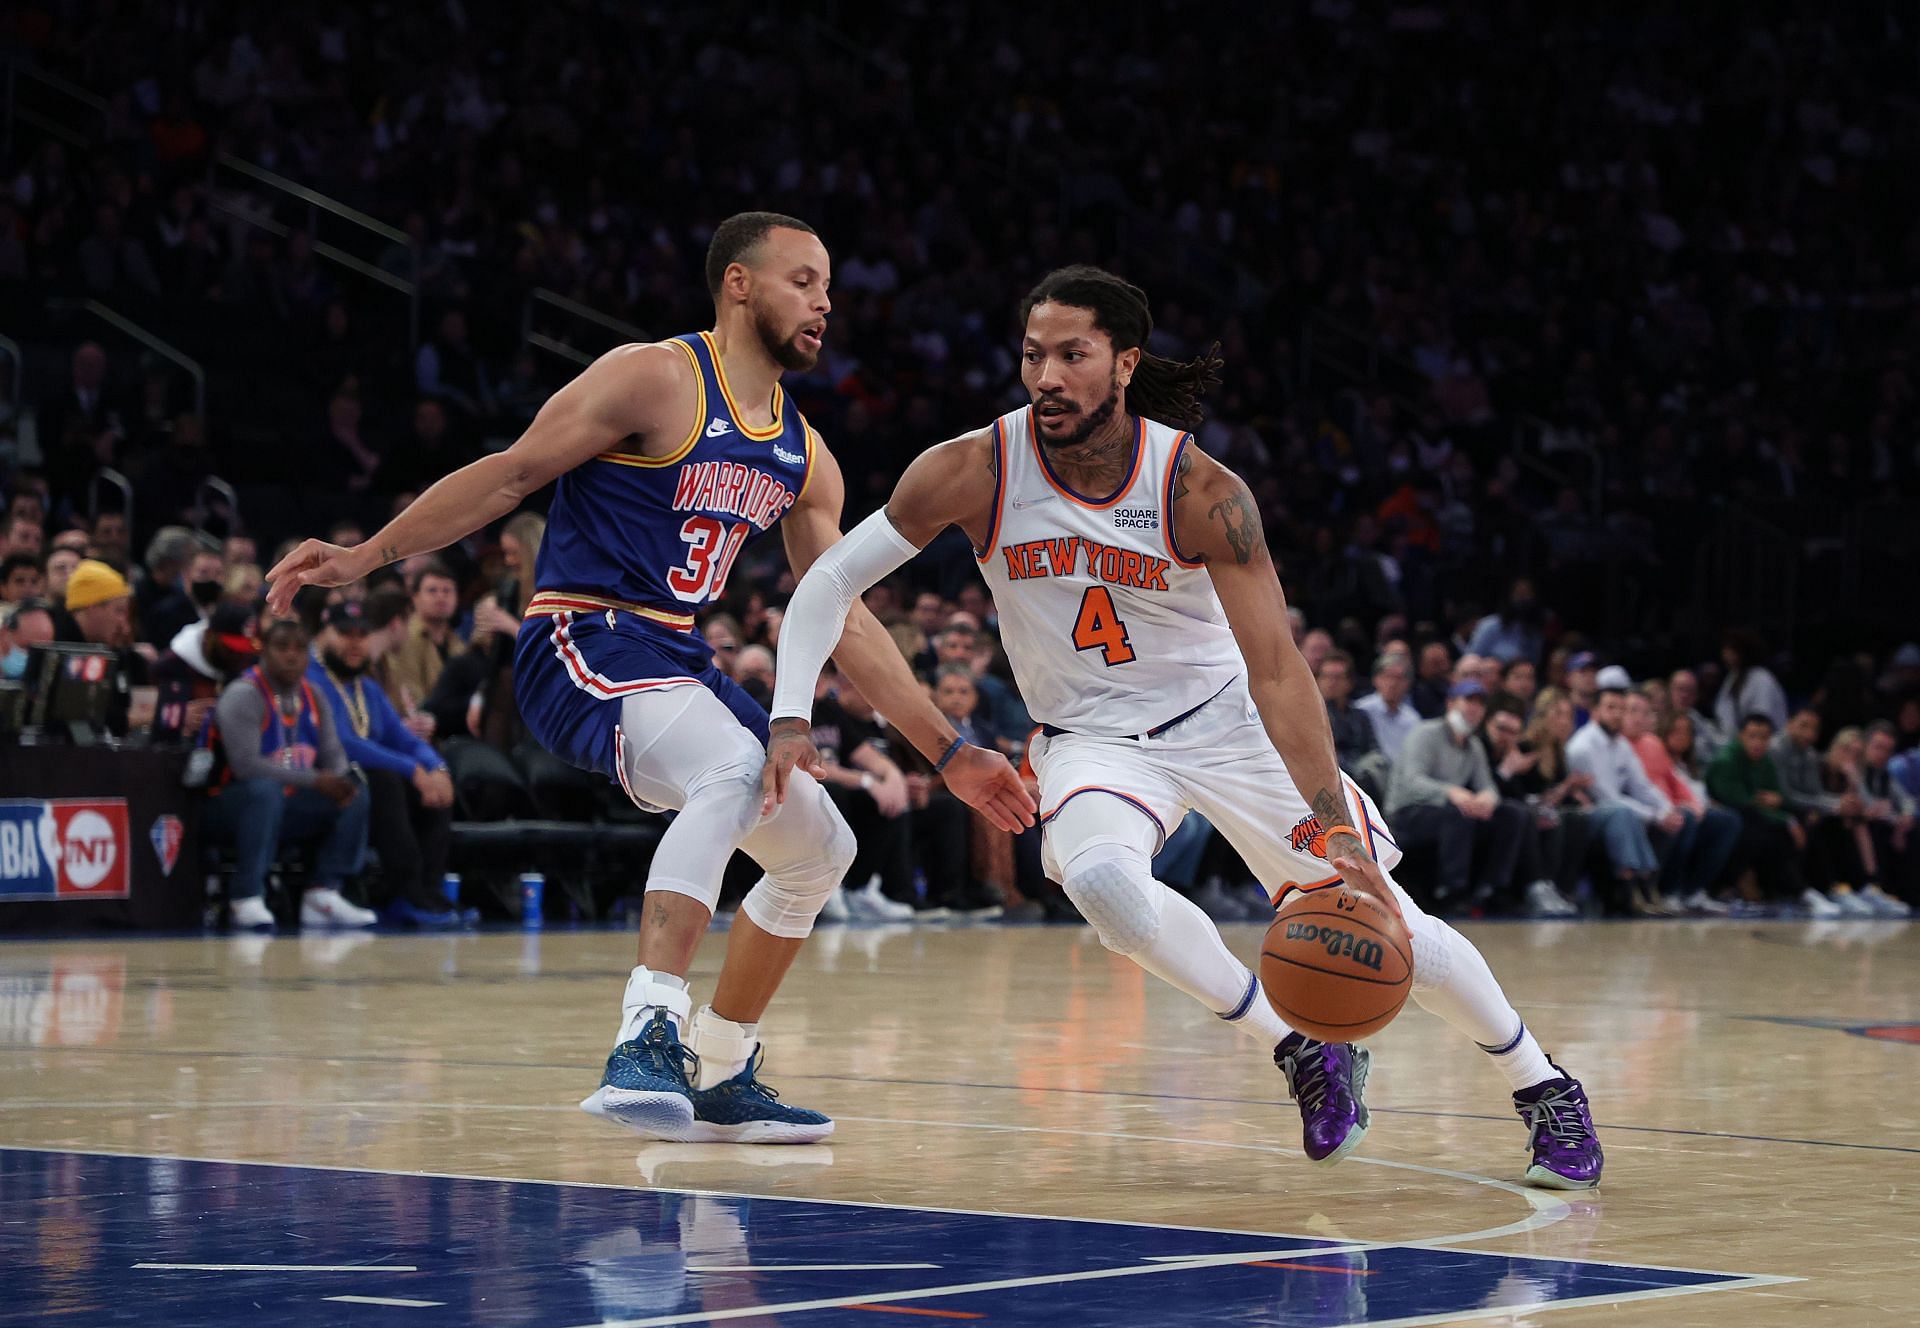 Derrick Rose of the New York Knicks against Steph Curry of the Golden State Warriors